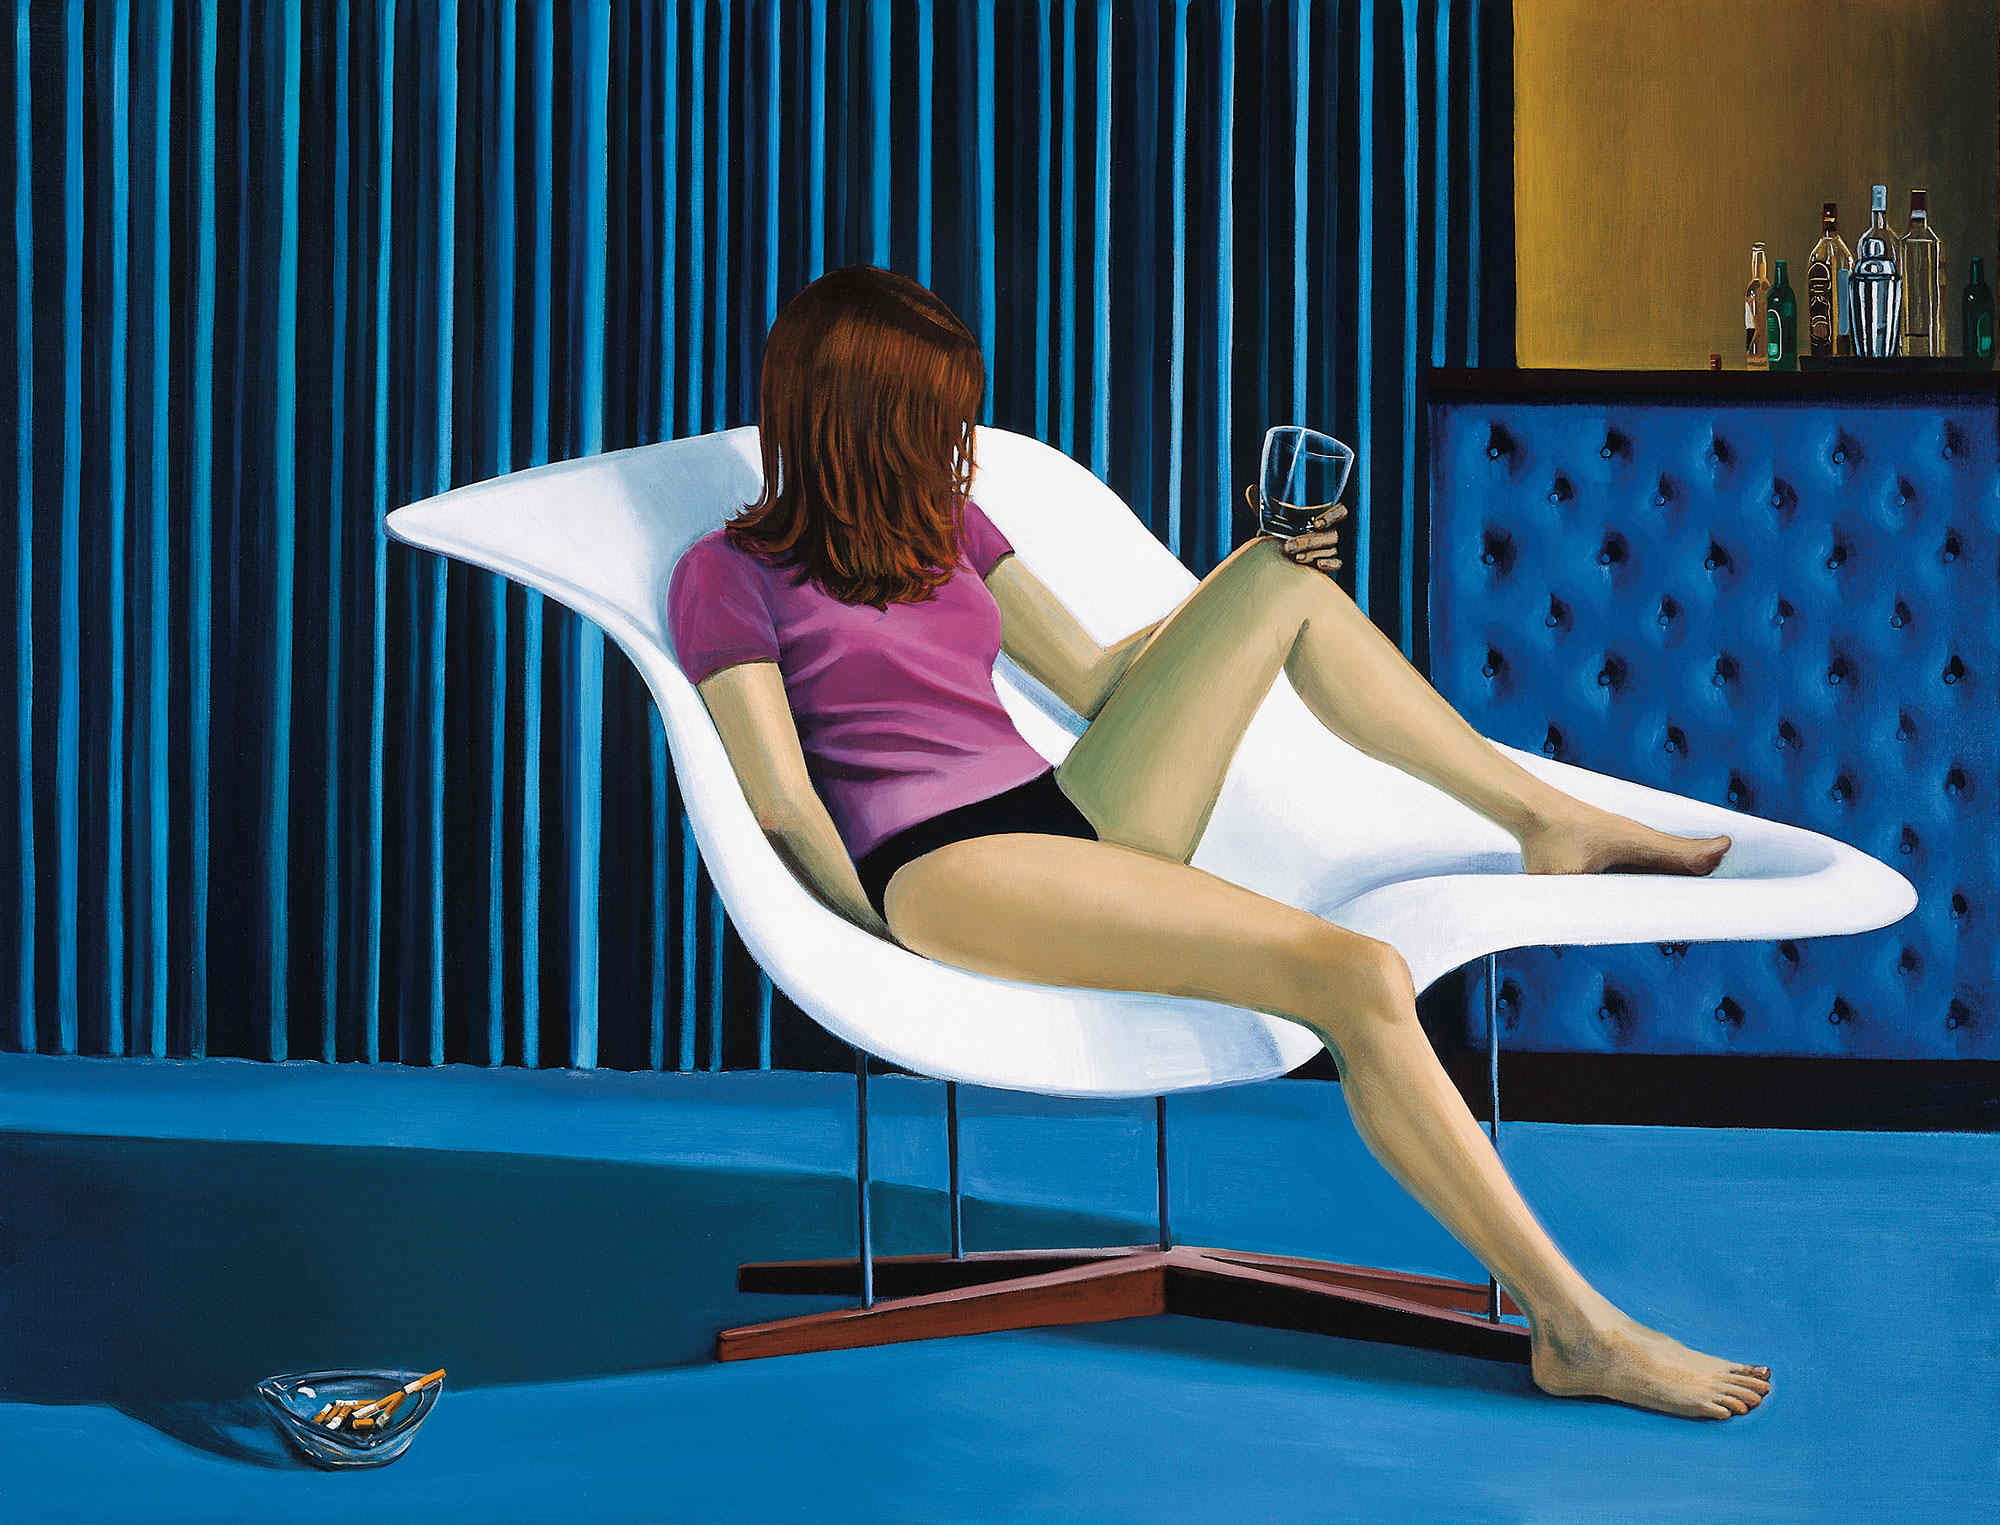 Anne WALLACE 'Eames Chair' 2004 | oil on canvas | Collection of Kate Green and Warren Tease, Sydney